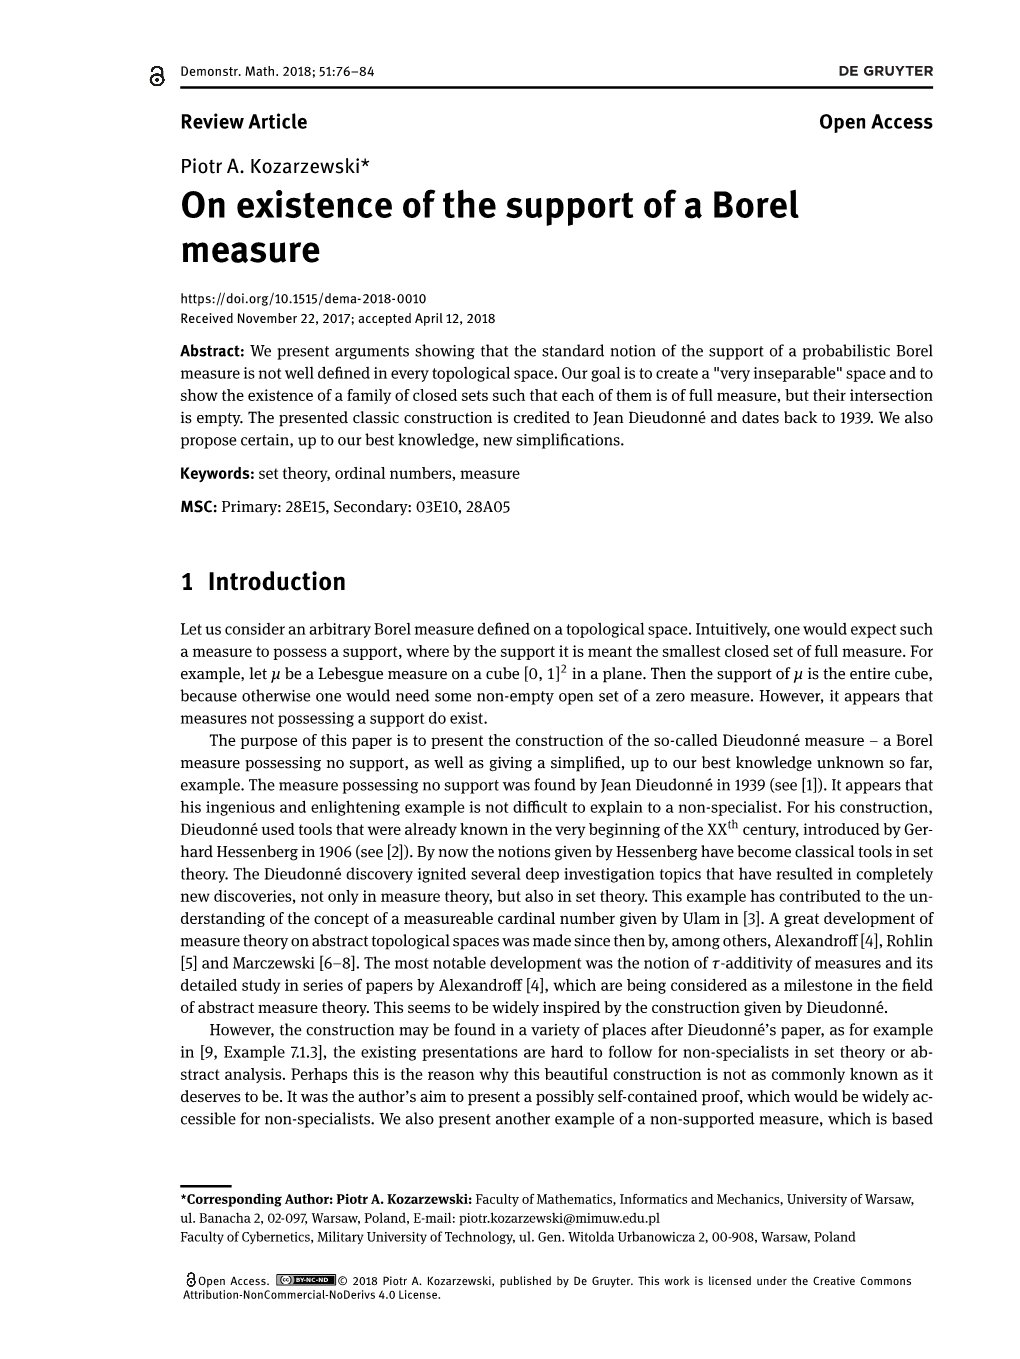 On Existence of the Support of a Borel Measure Received November 22, 2017; Accepted April 12, 2018